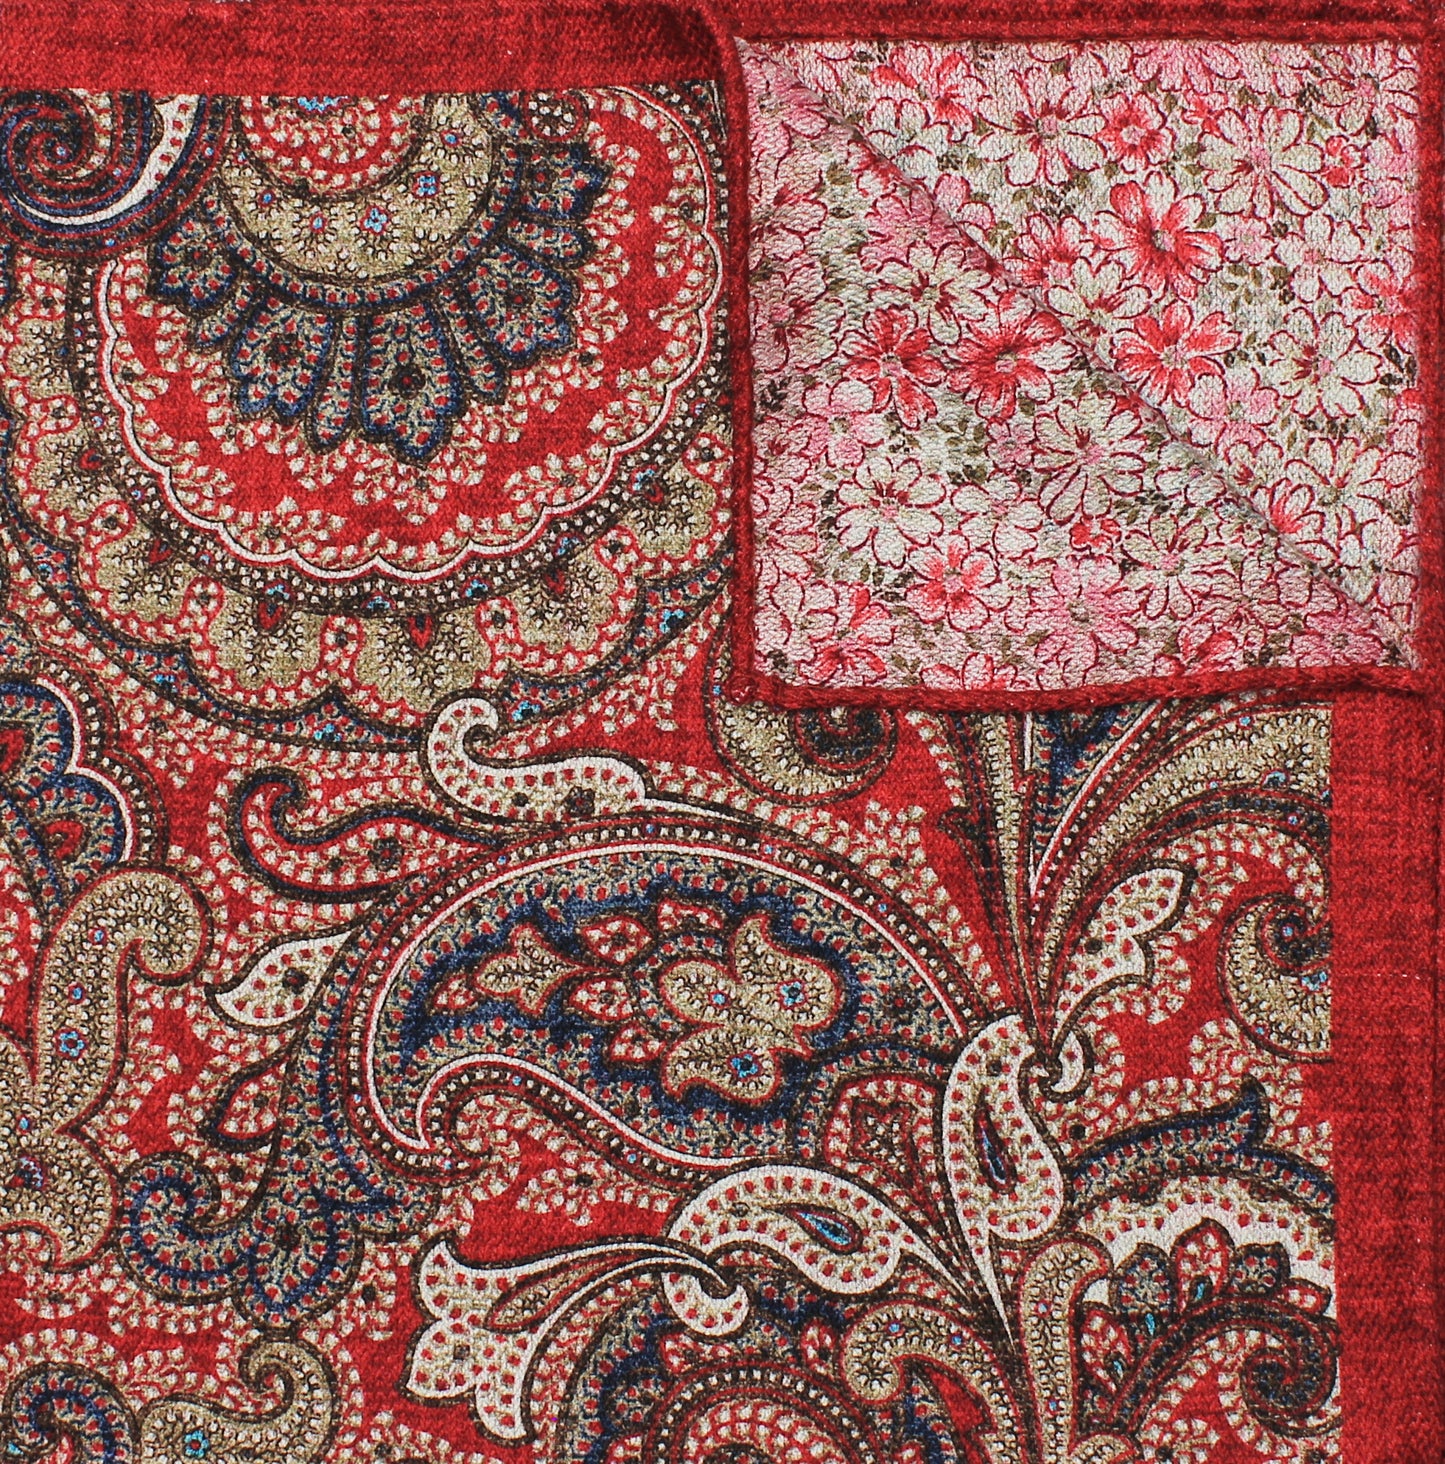 Red Printed Reversible Paisley/Floral